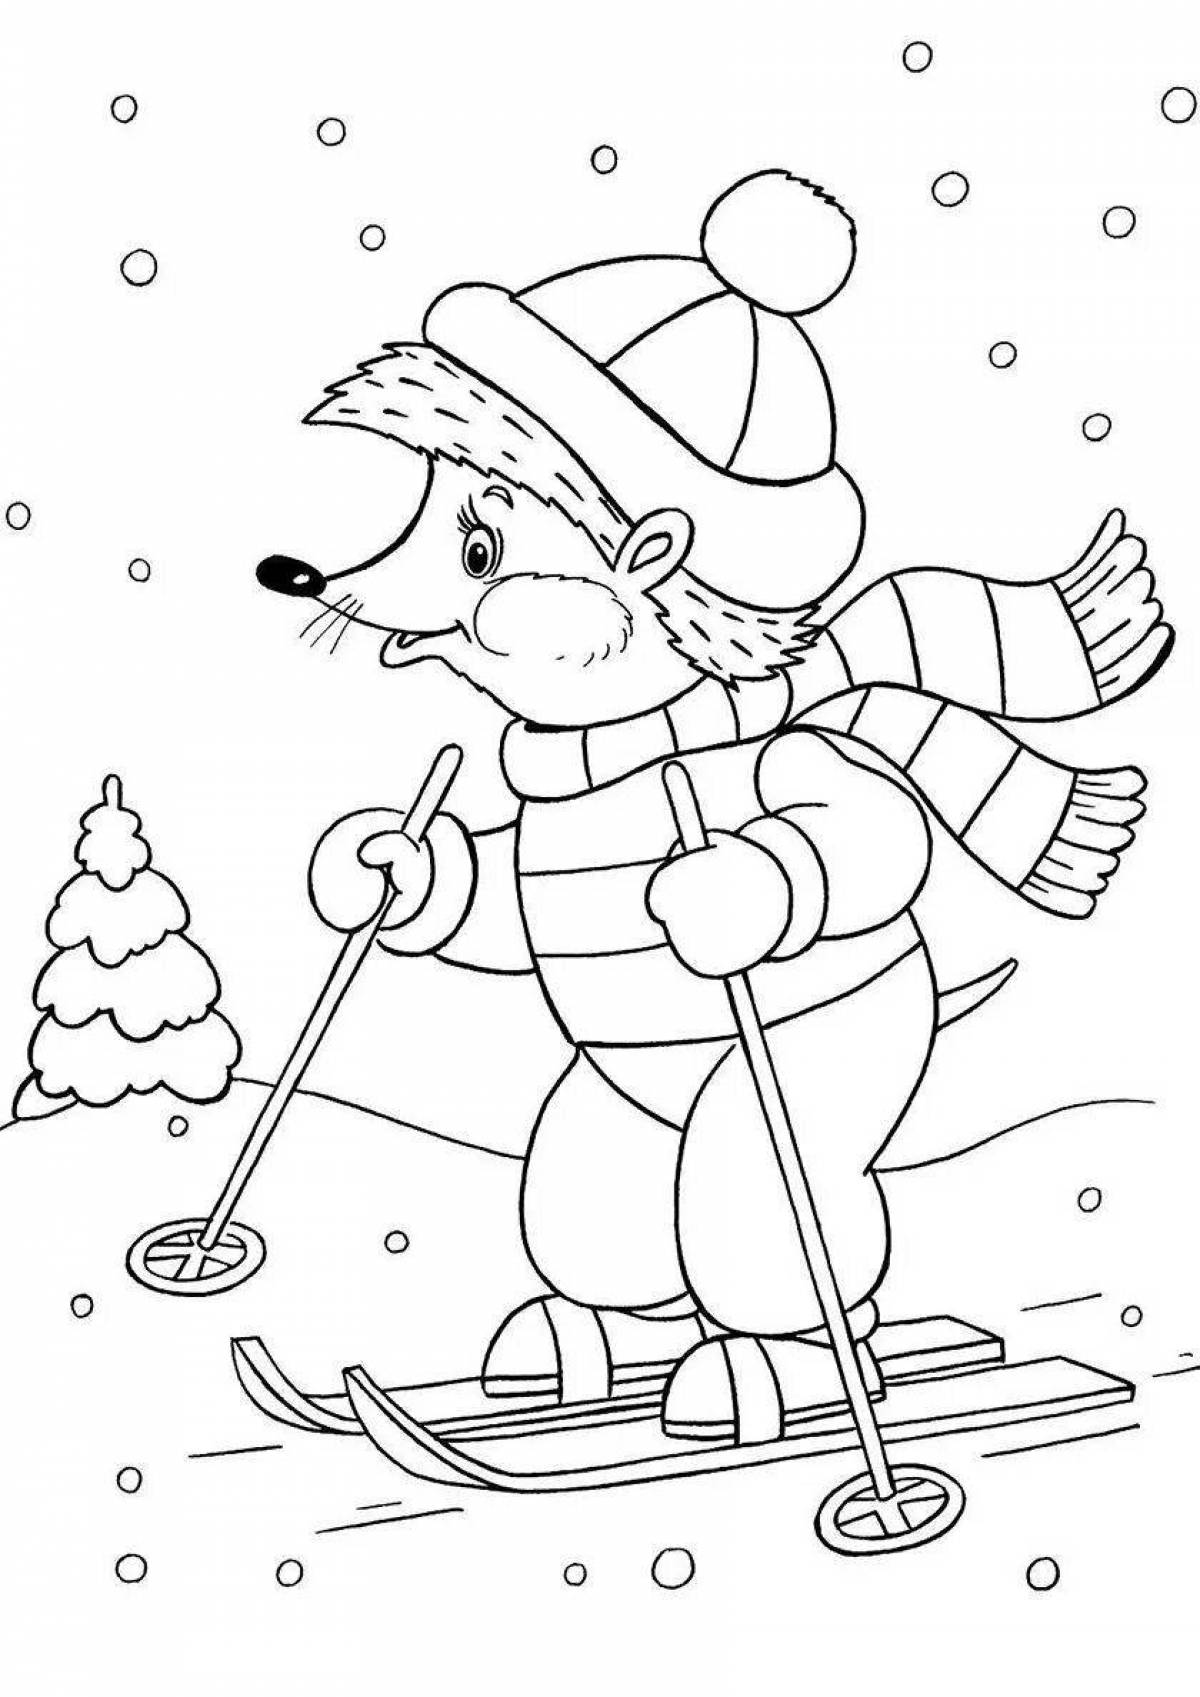 Fabulous winter coloring book for children 3-4 years old